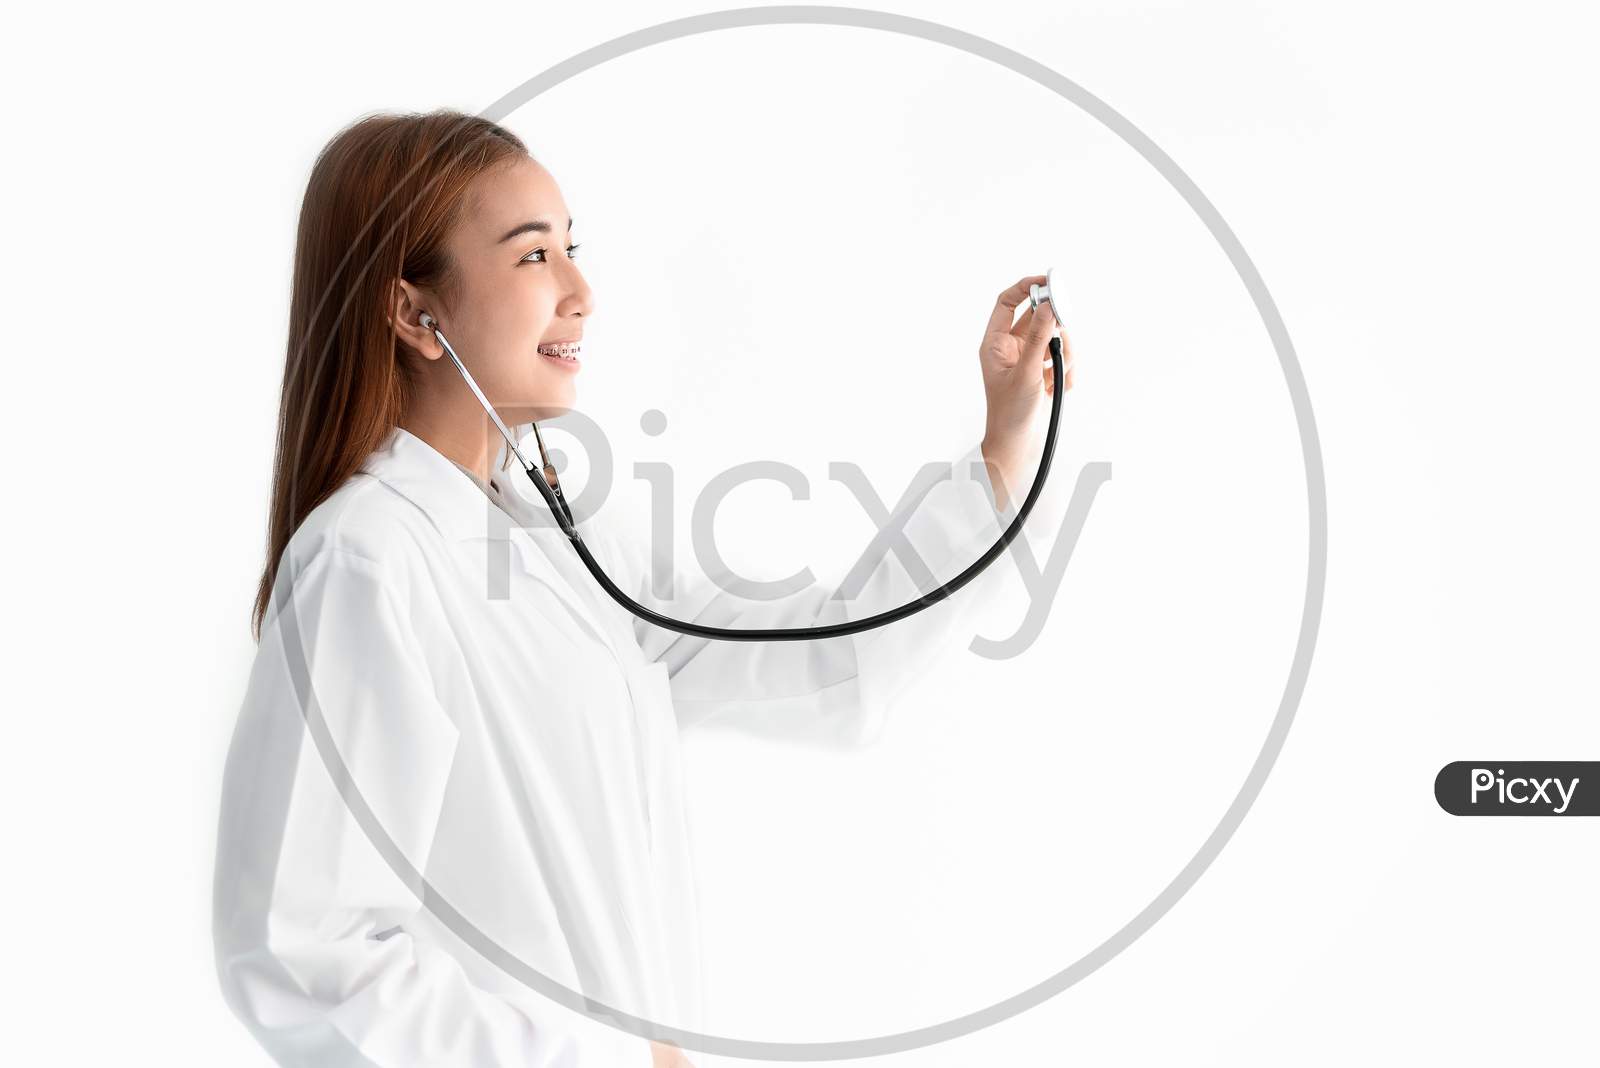 Female Doctor Is Holding Stethoscope And Hear Heart Beat Sound On White Isolated Background. Medical And Healthcare Concept. Hospital And People Theme